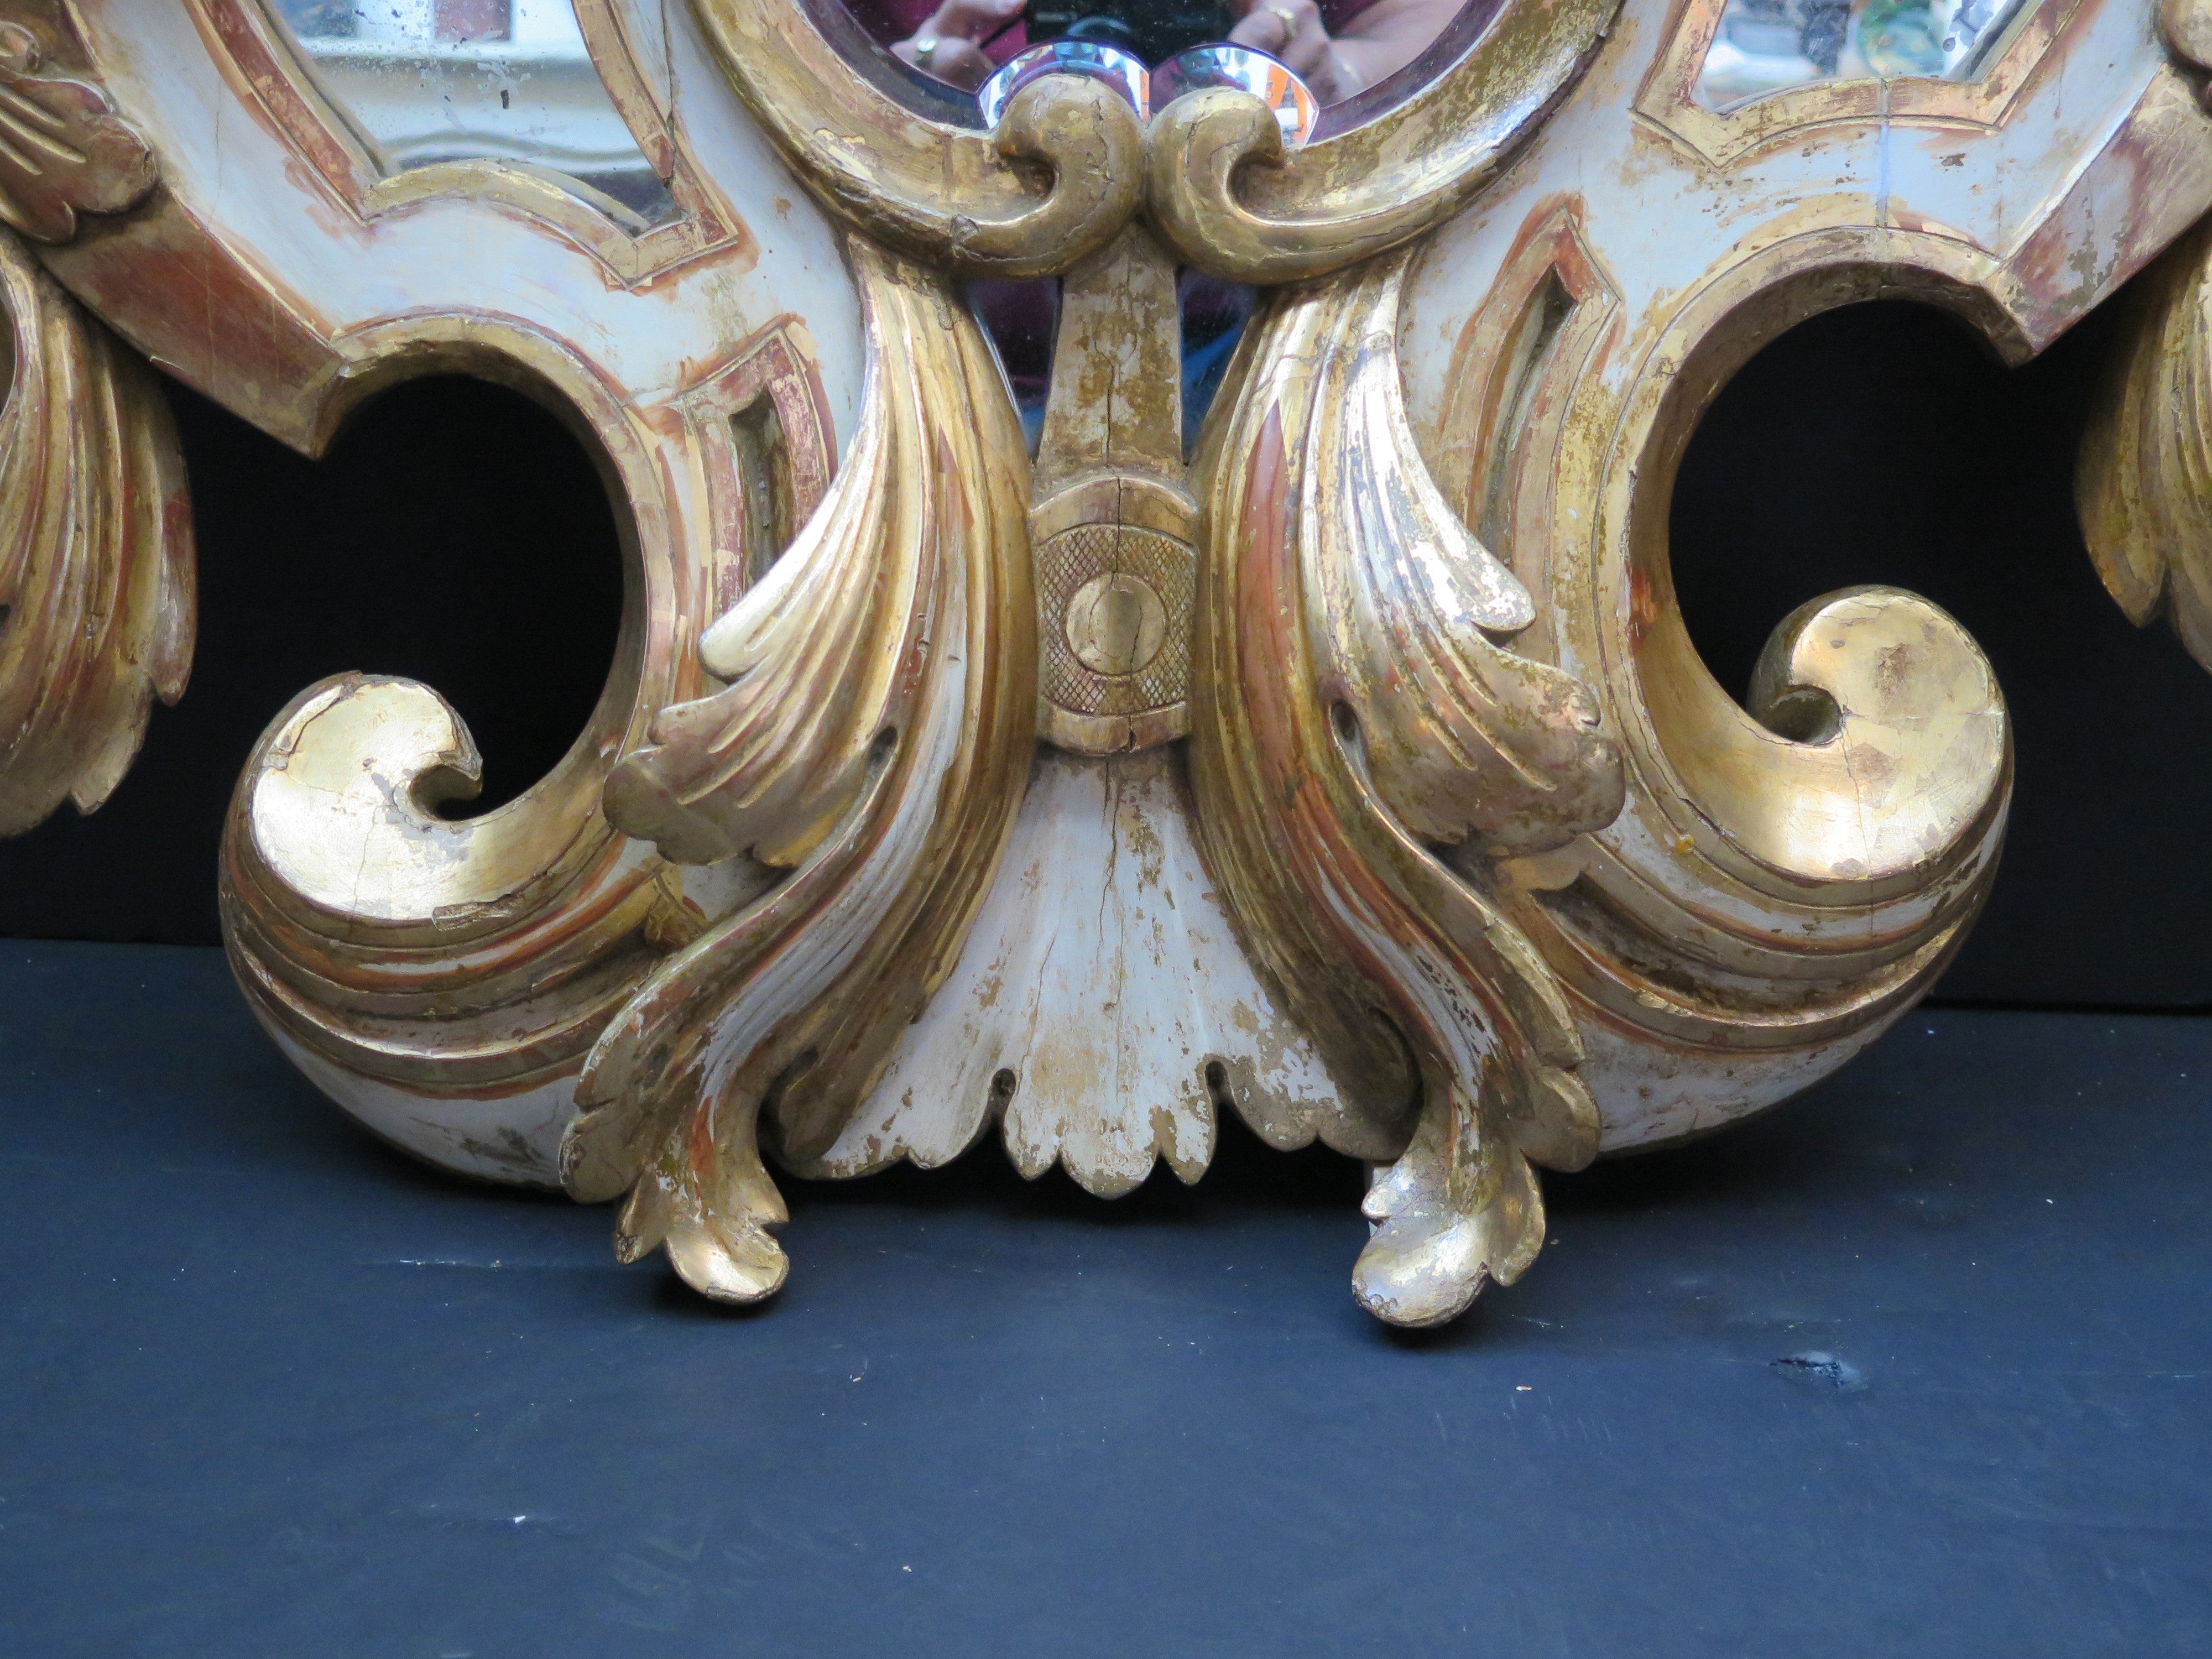 Large Baroque-Style Carved Giltwood Mirror  C. 1850, Italy